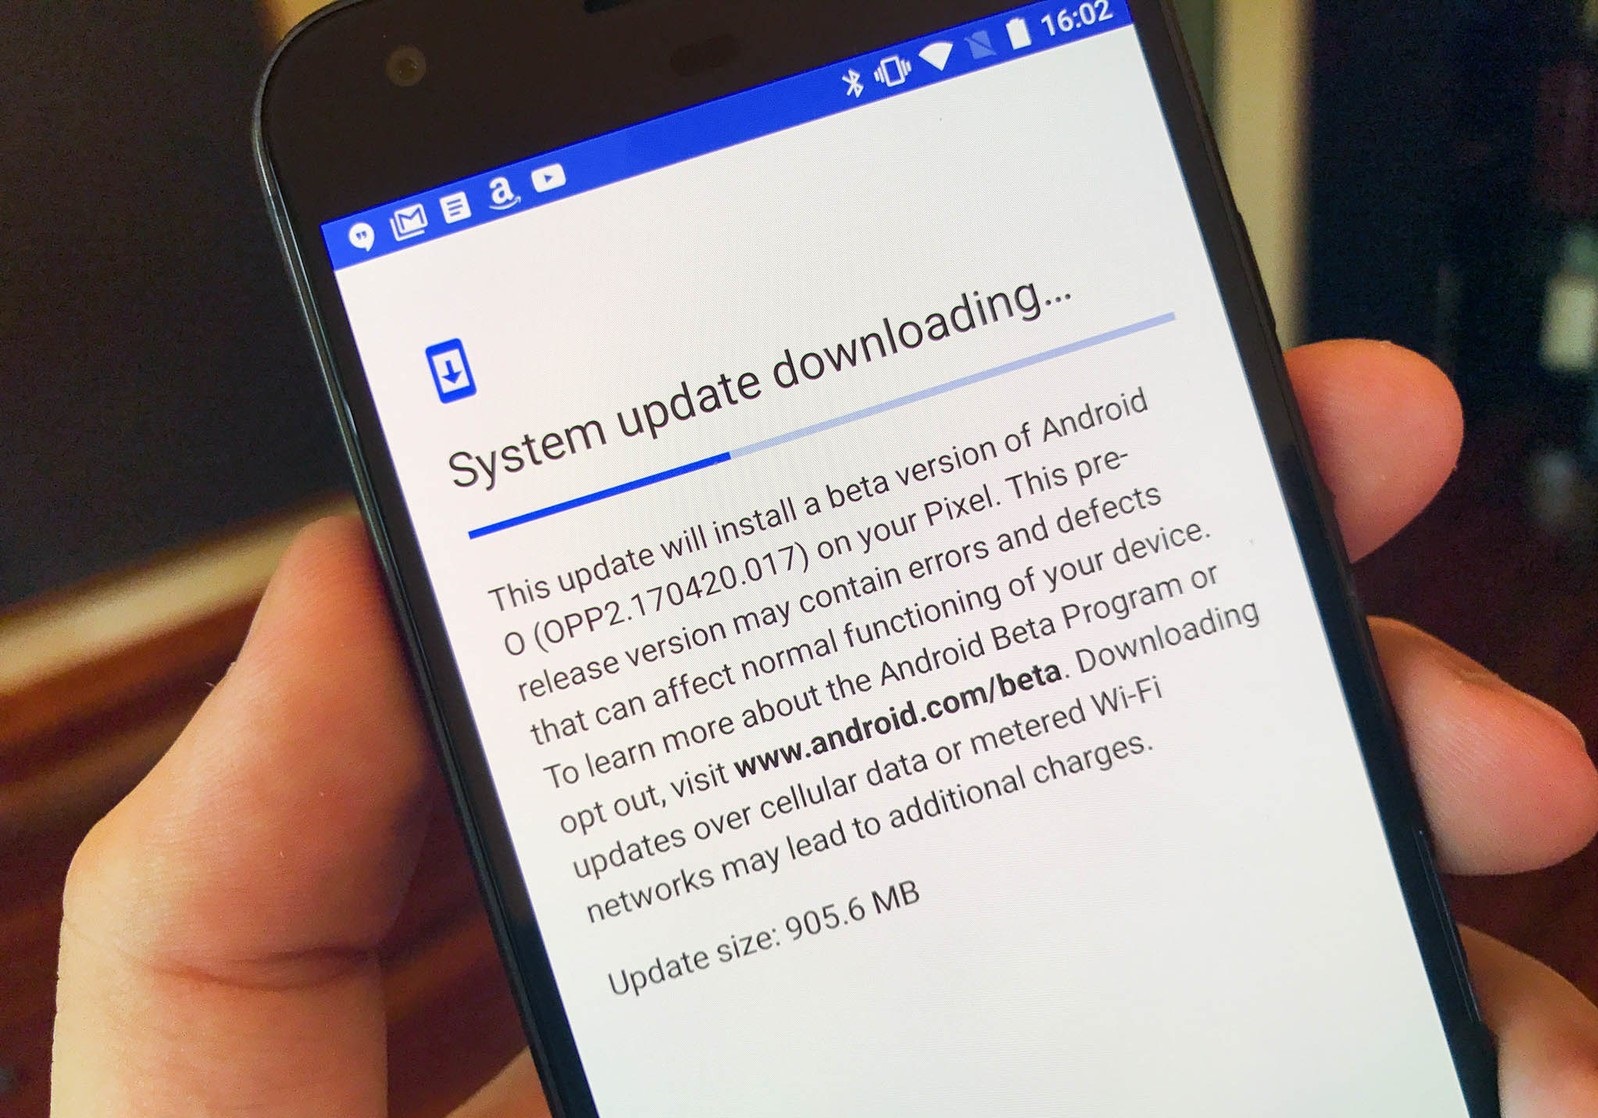 How to Install Android 9.0 Pie on your Pixel Phone